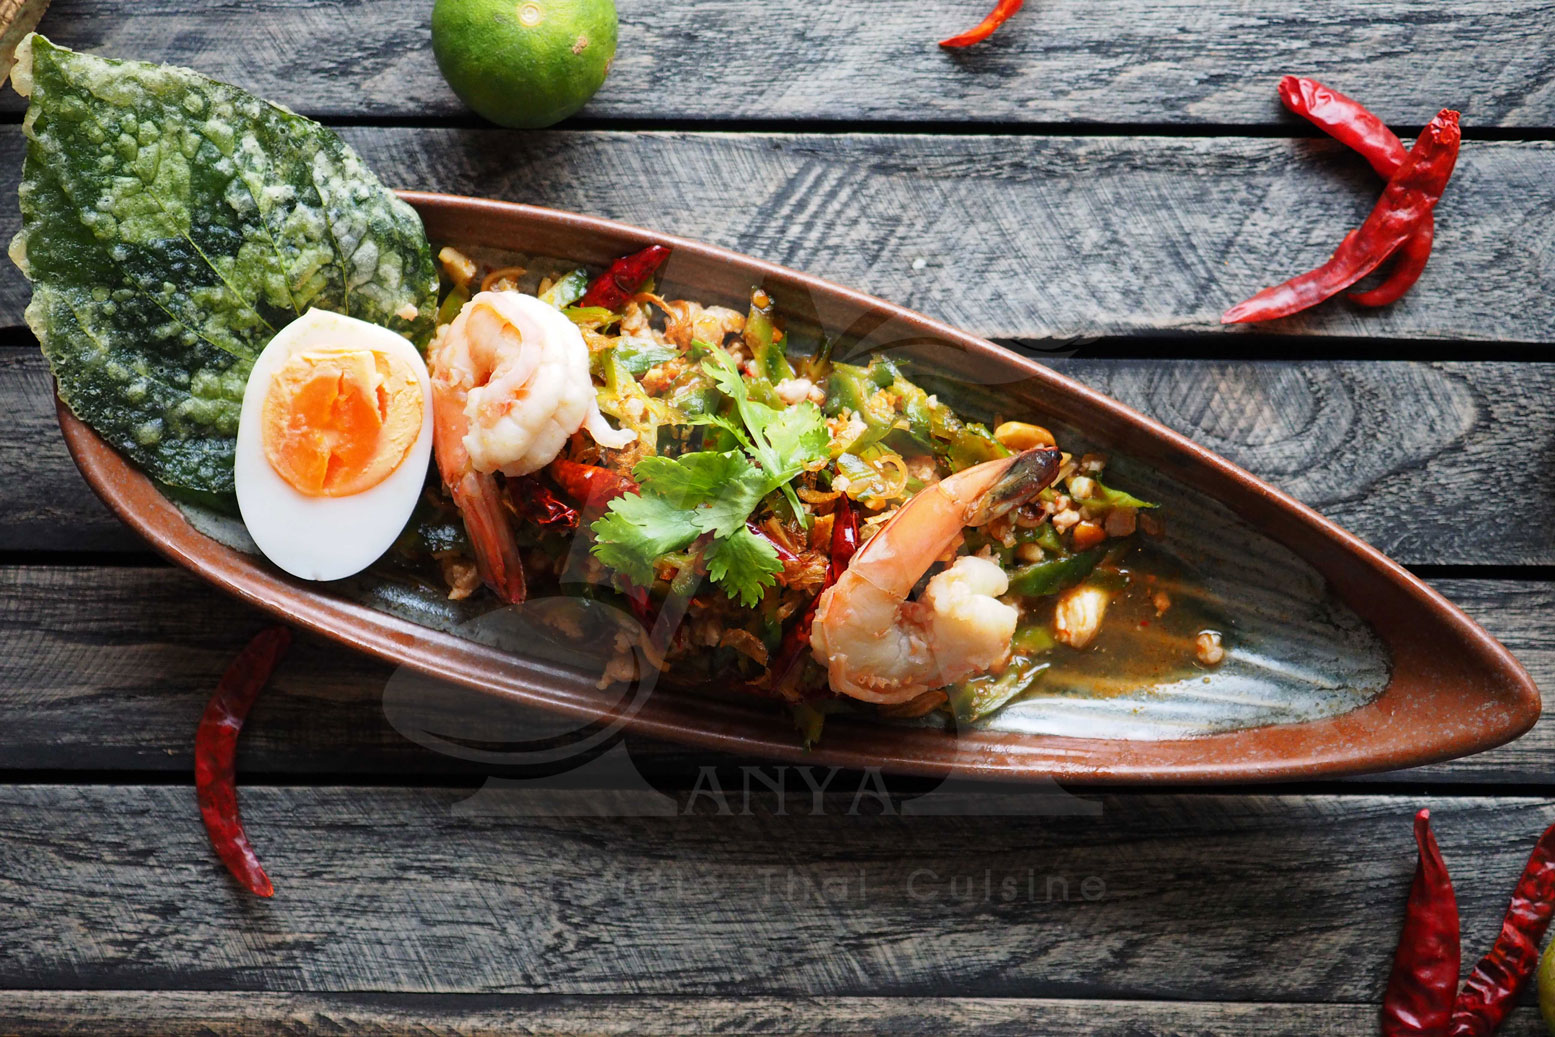 Spicy Salad With Thai Winged Bean And Prawns